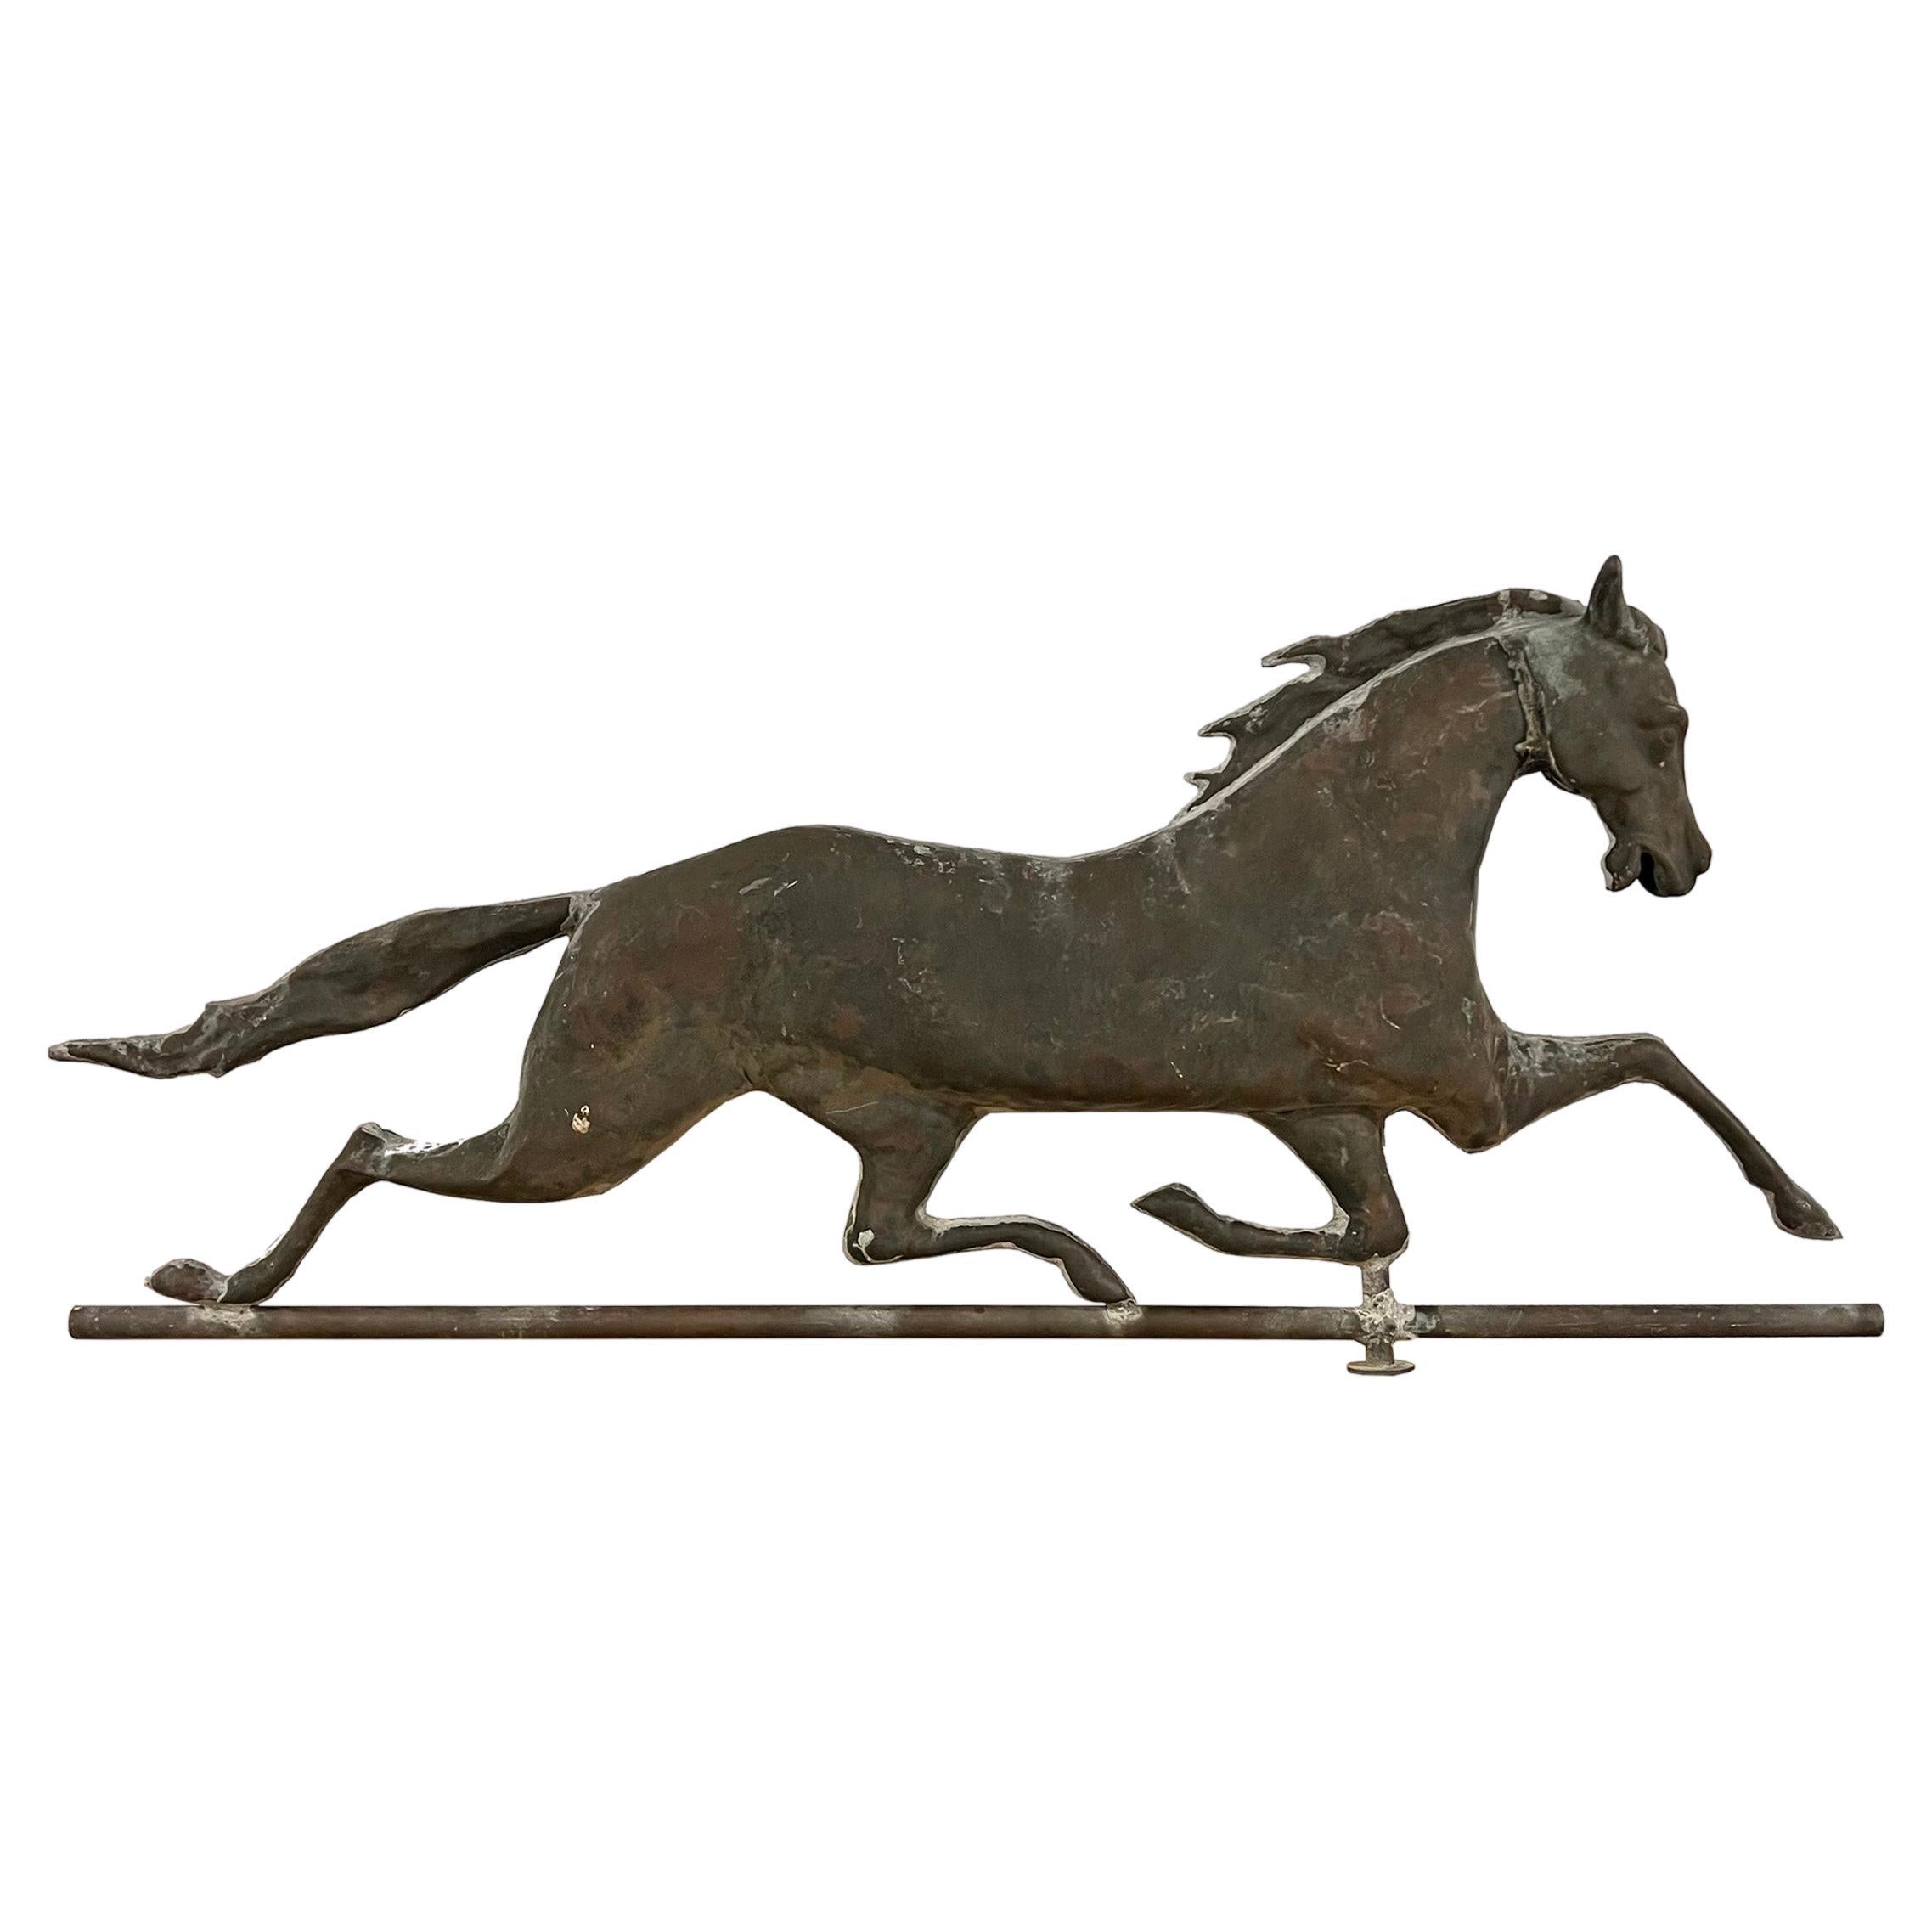 19th Century American Patchen Horse Weathervane by E.G. Washburne & Co.